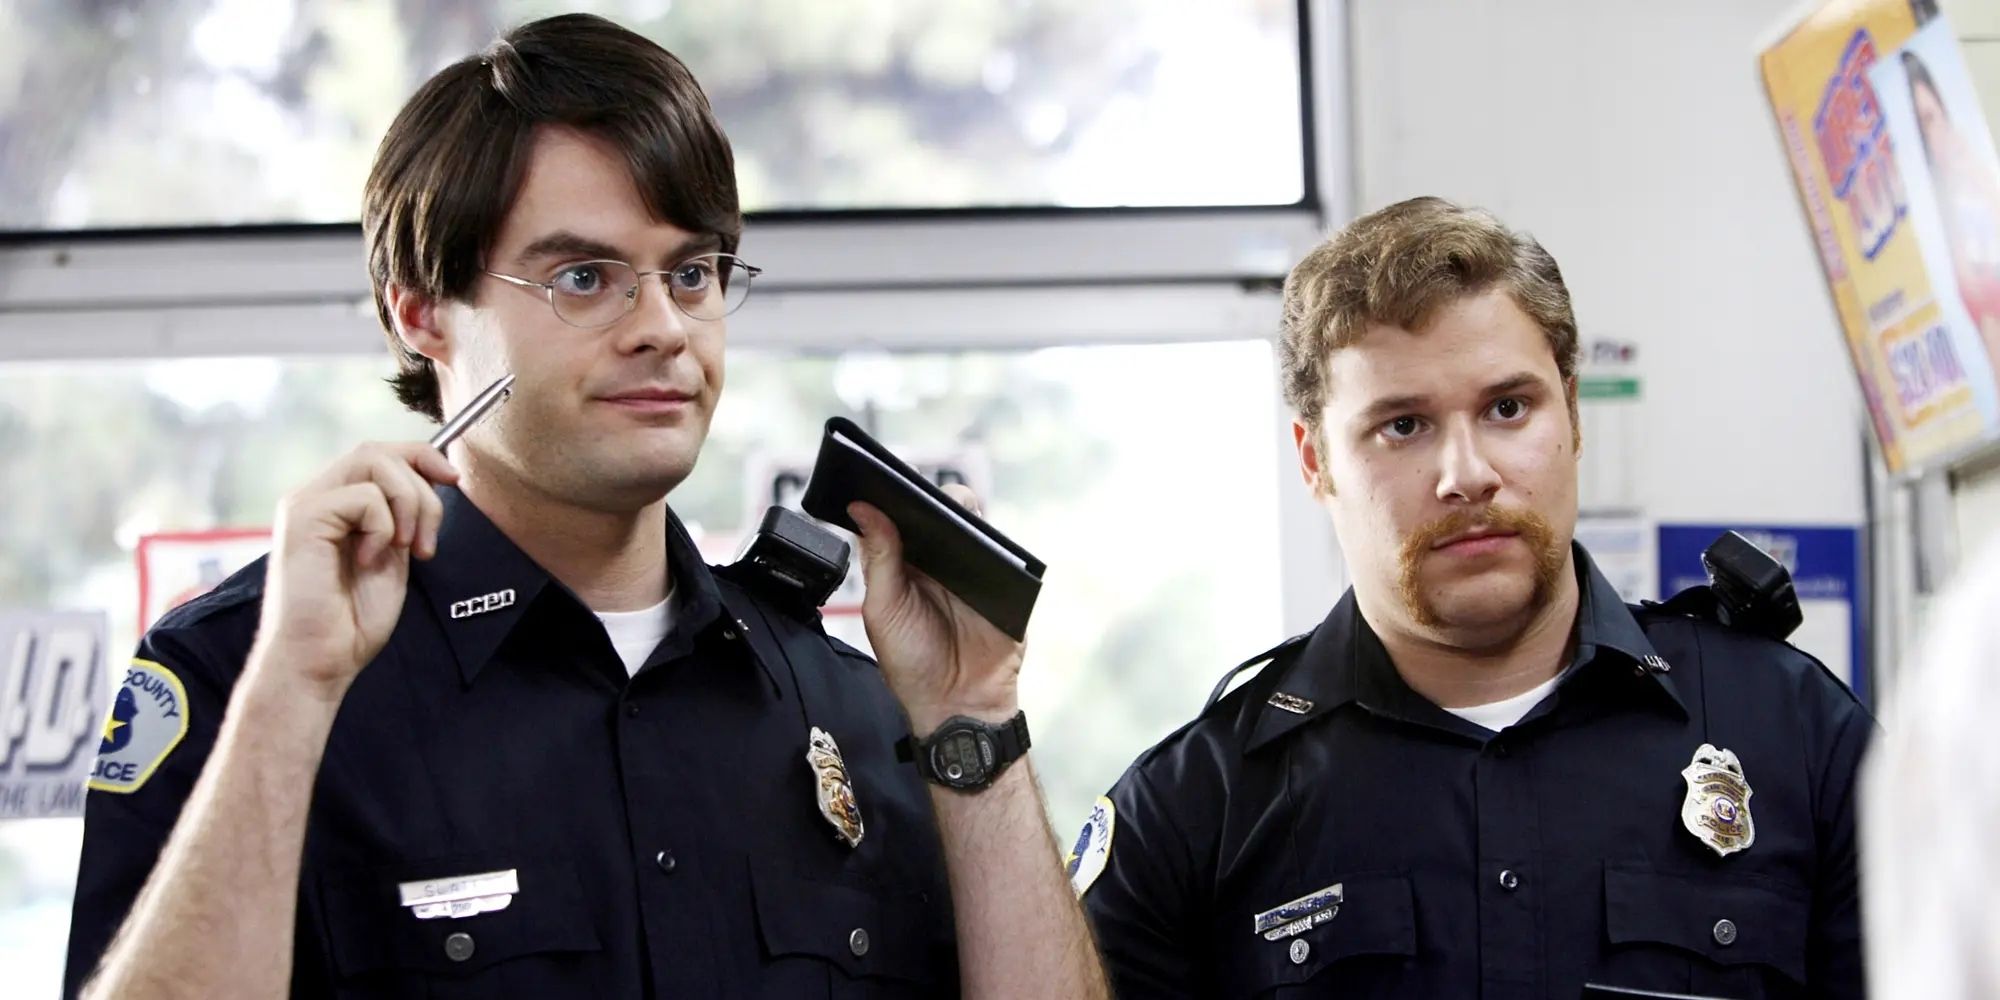 Seth Rogen as Officer Michaels and Bill Hader as Officer Slater in uniform in Superbad